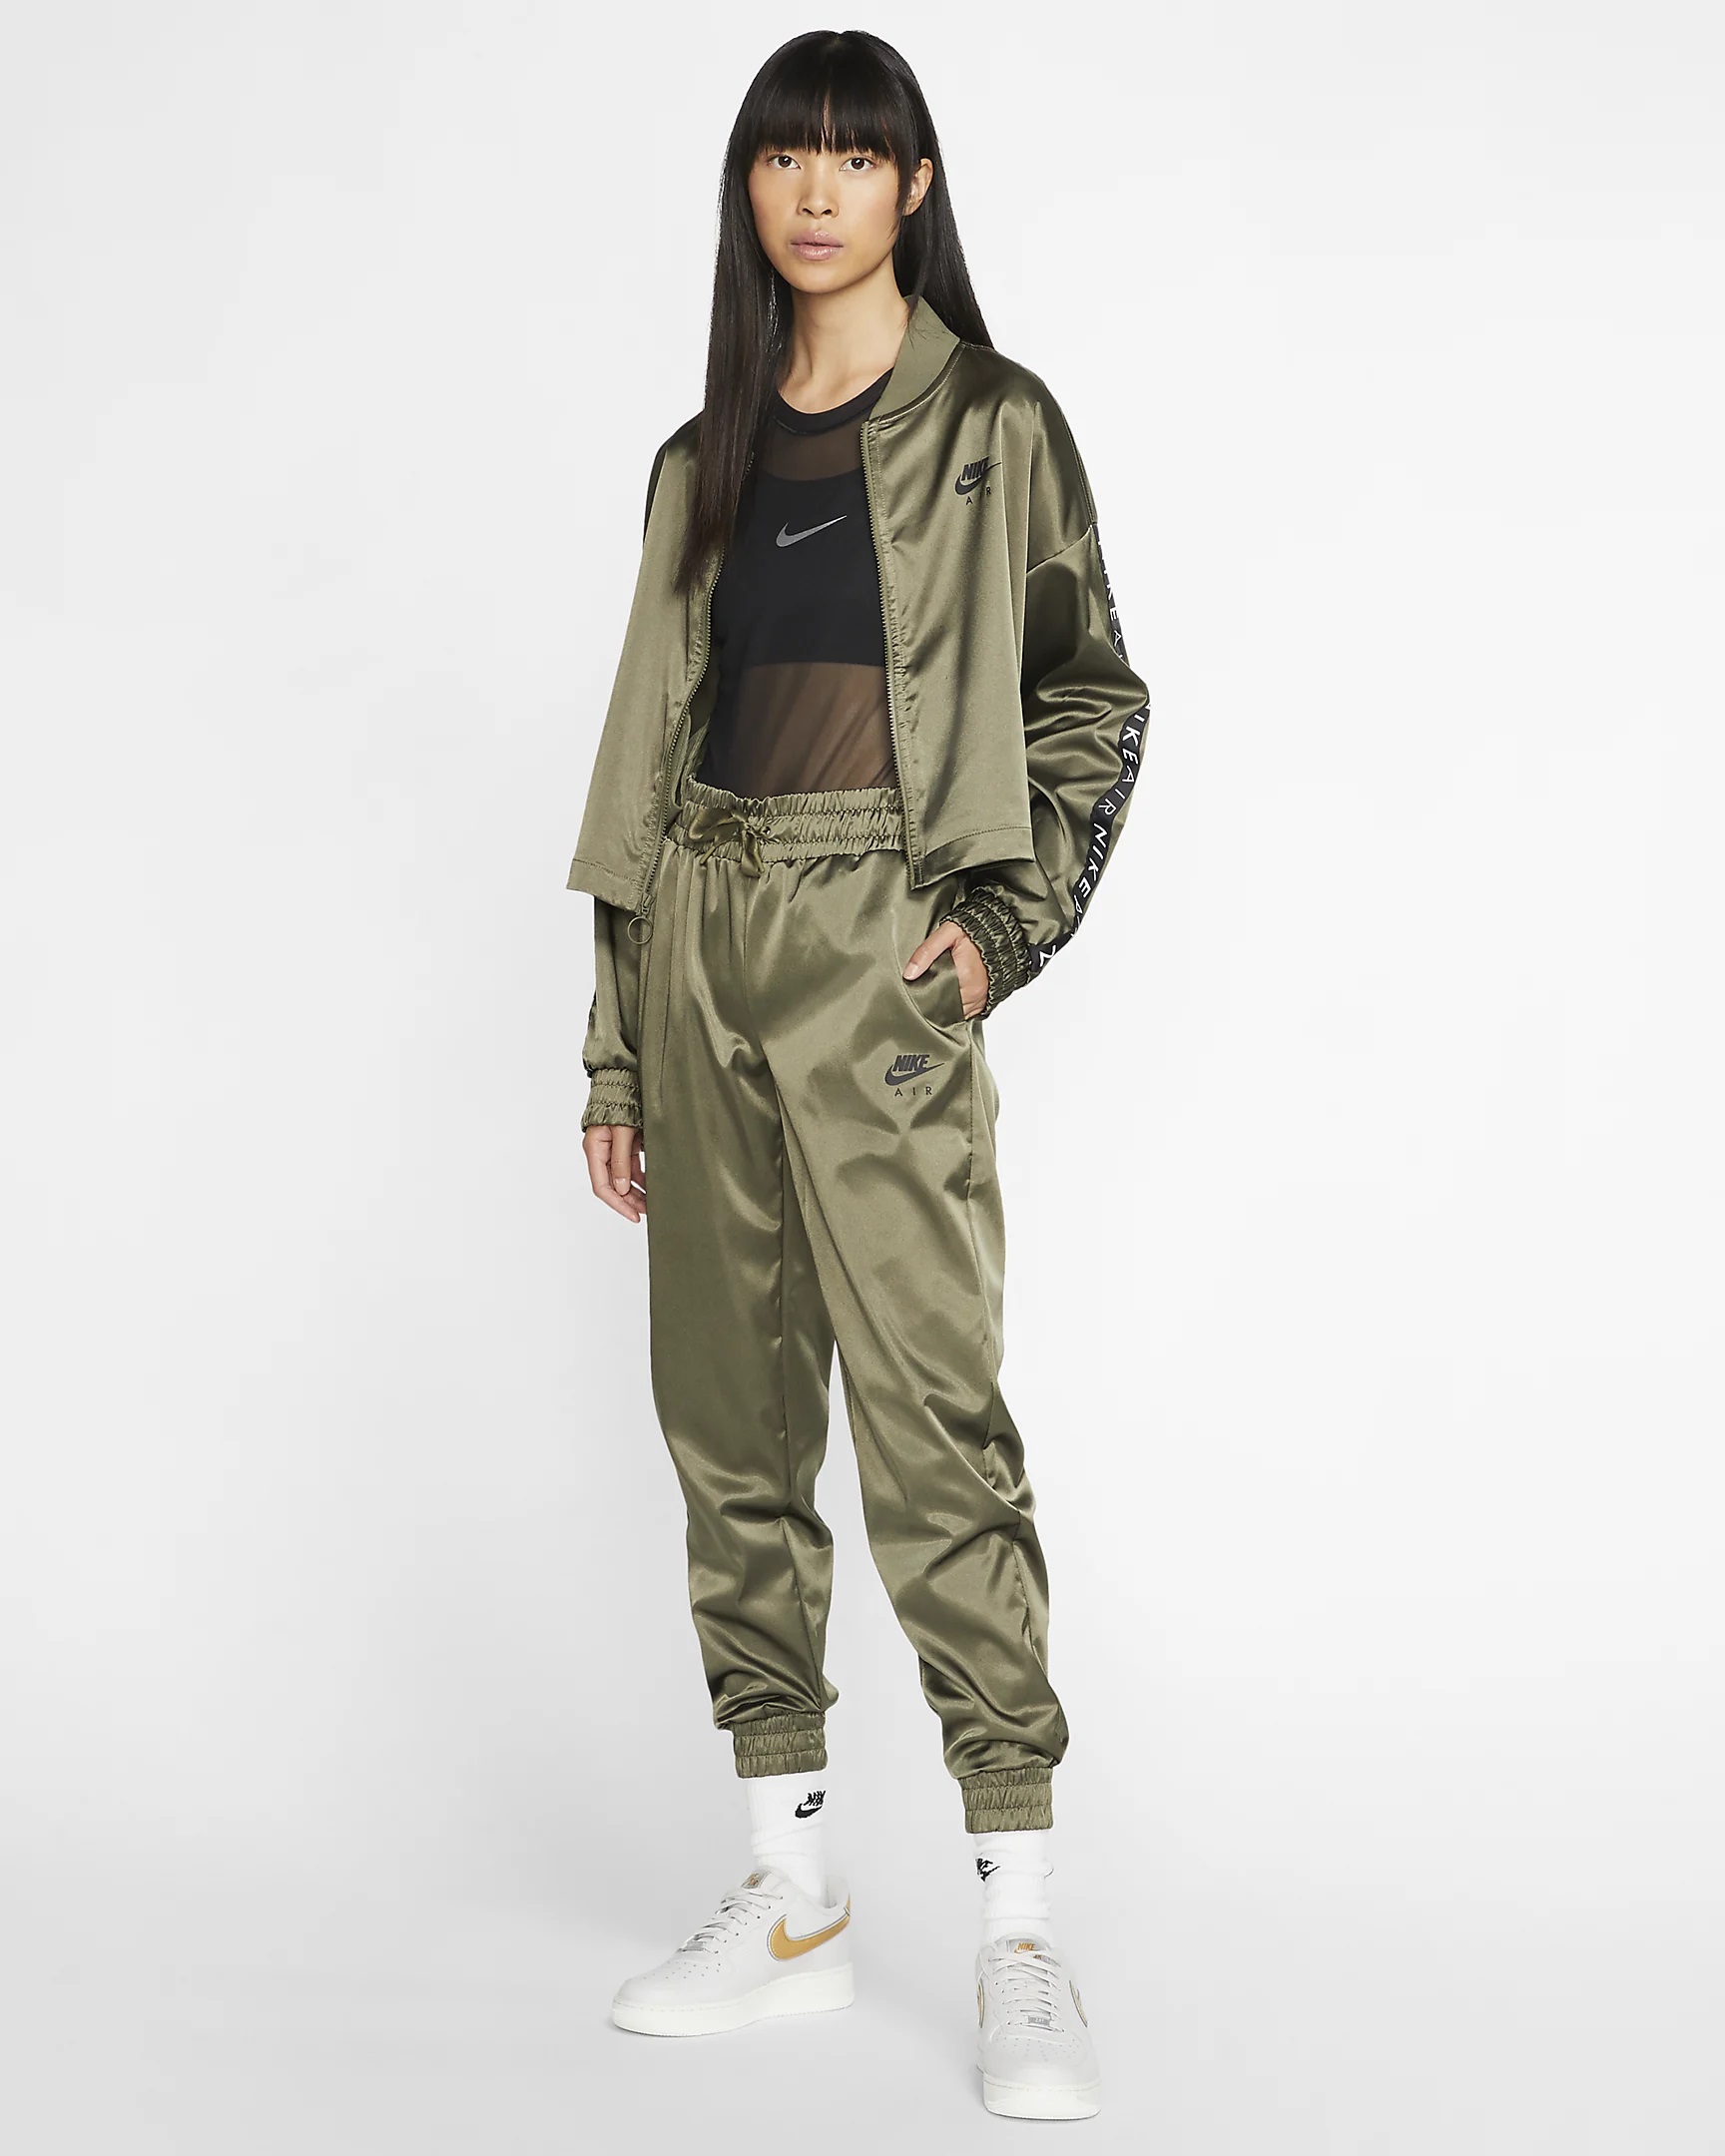 Strike A Smooth Pose In Nike's Air Satin Track Pants | SNOBETTE